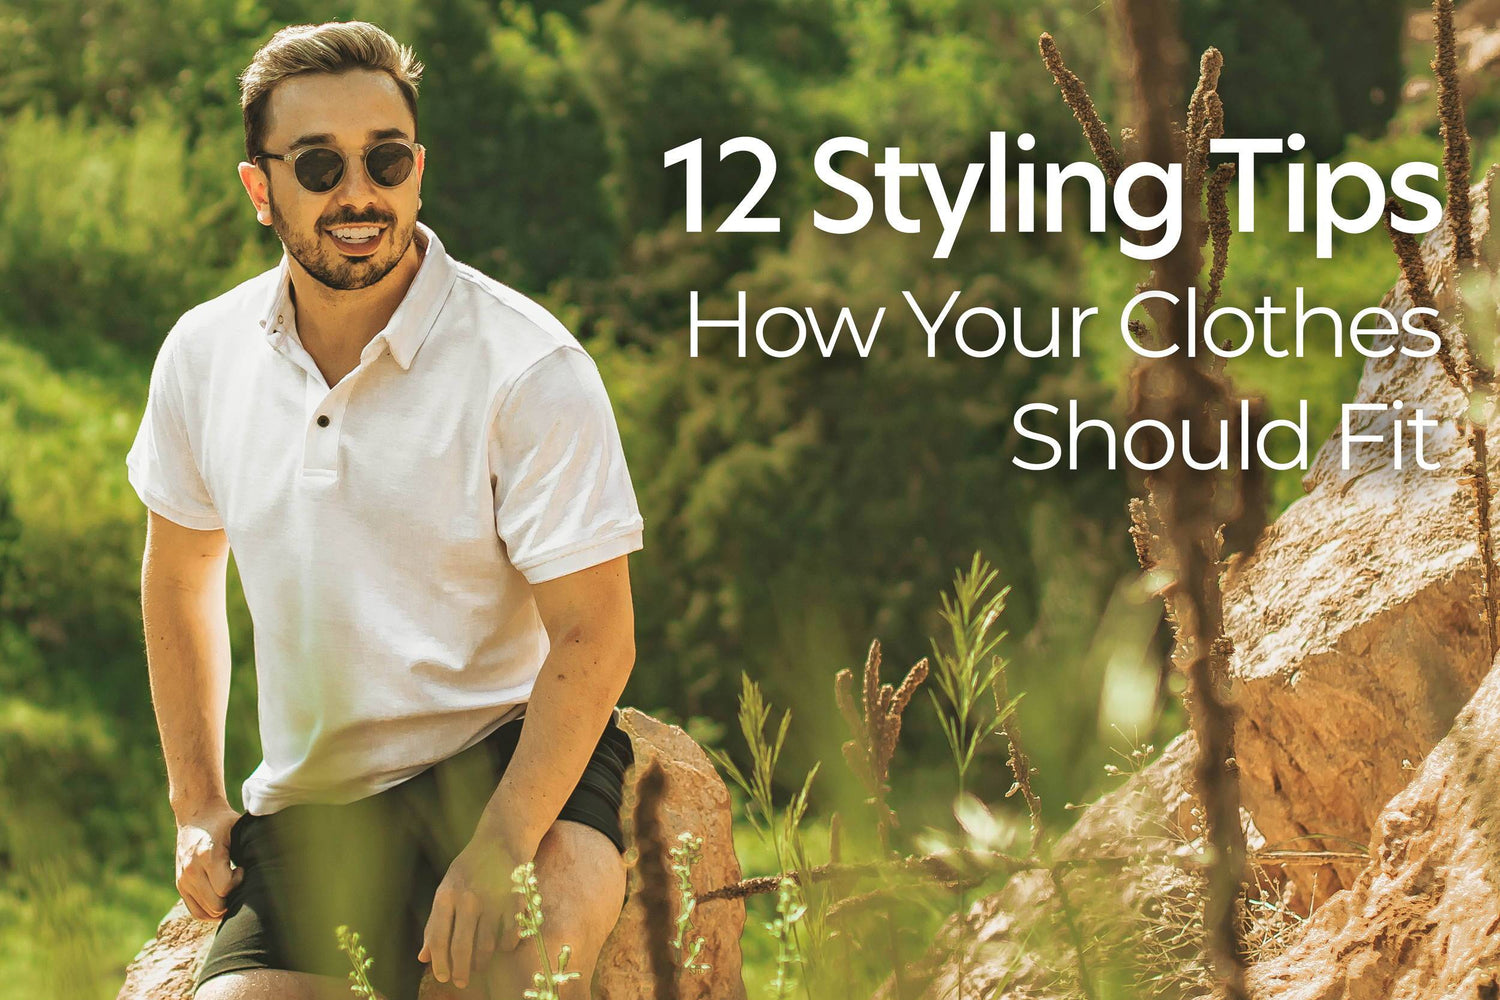 12 Style Tips for Short Men - How Your Clothes Should Fit